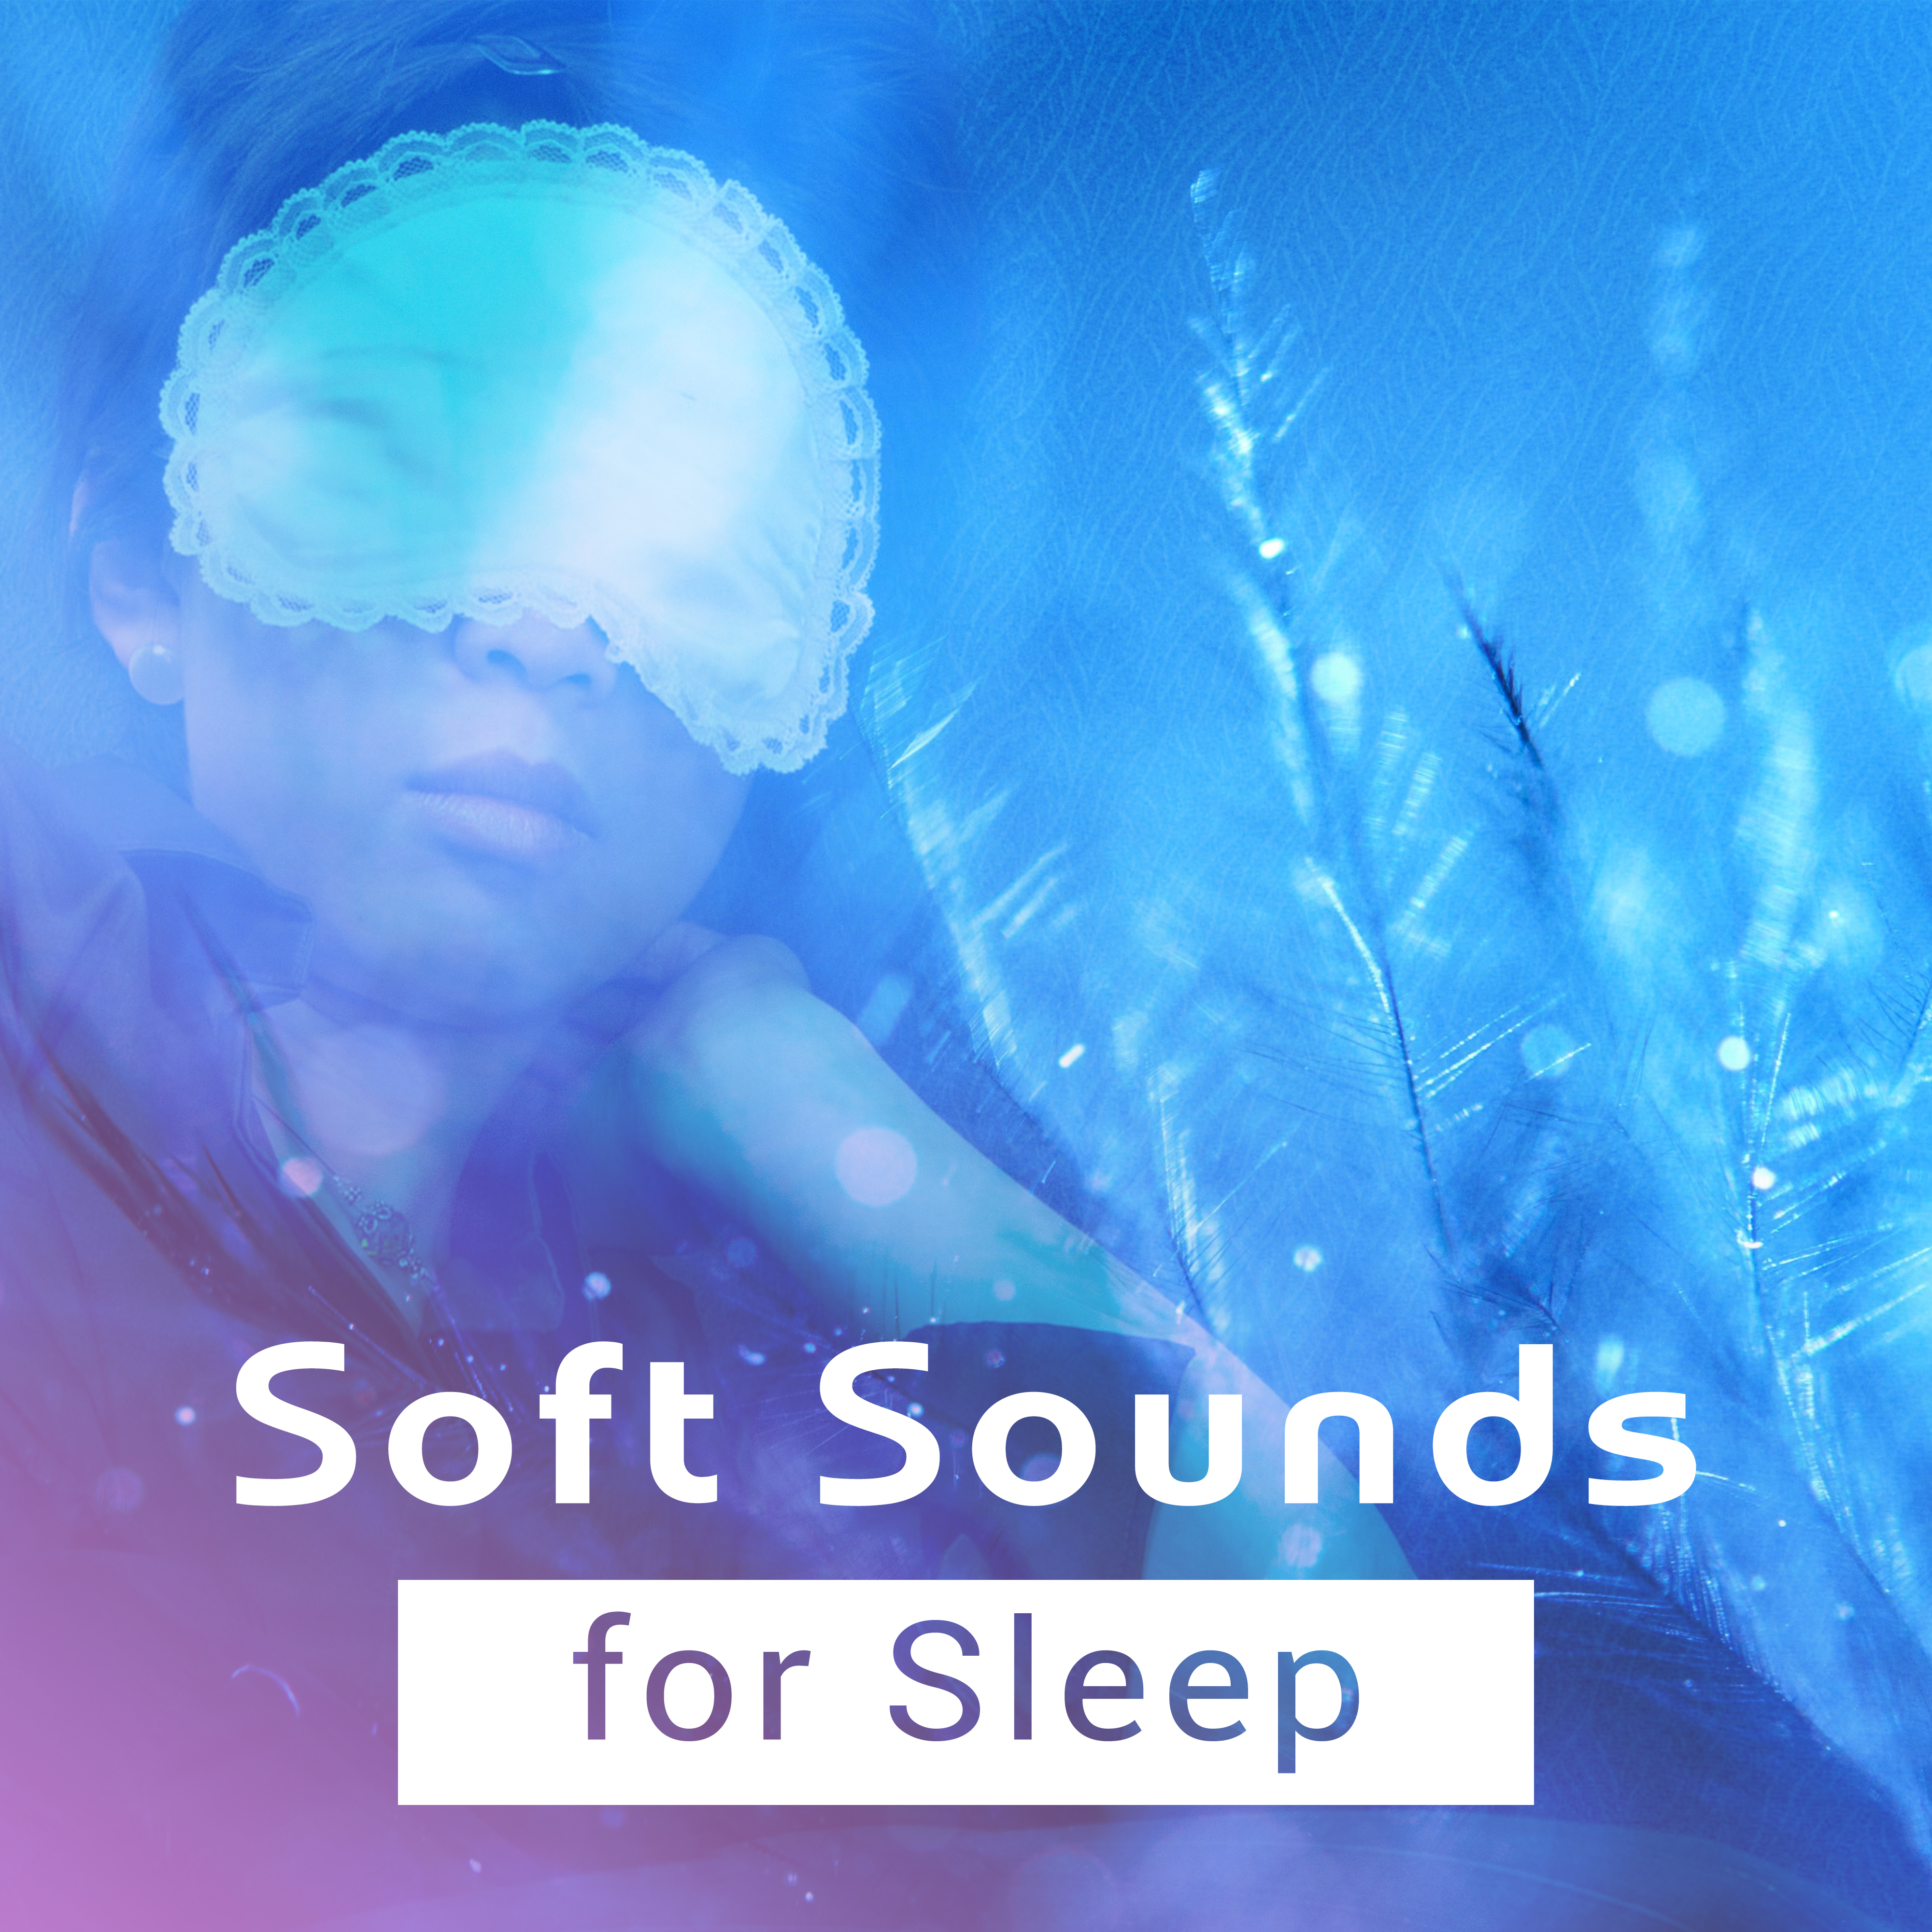 Soft Sounds for Sleep  Easy Listening, Peaceful Songs, Calm  Relaxing Melodies, Stress Relief, Sleep Well